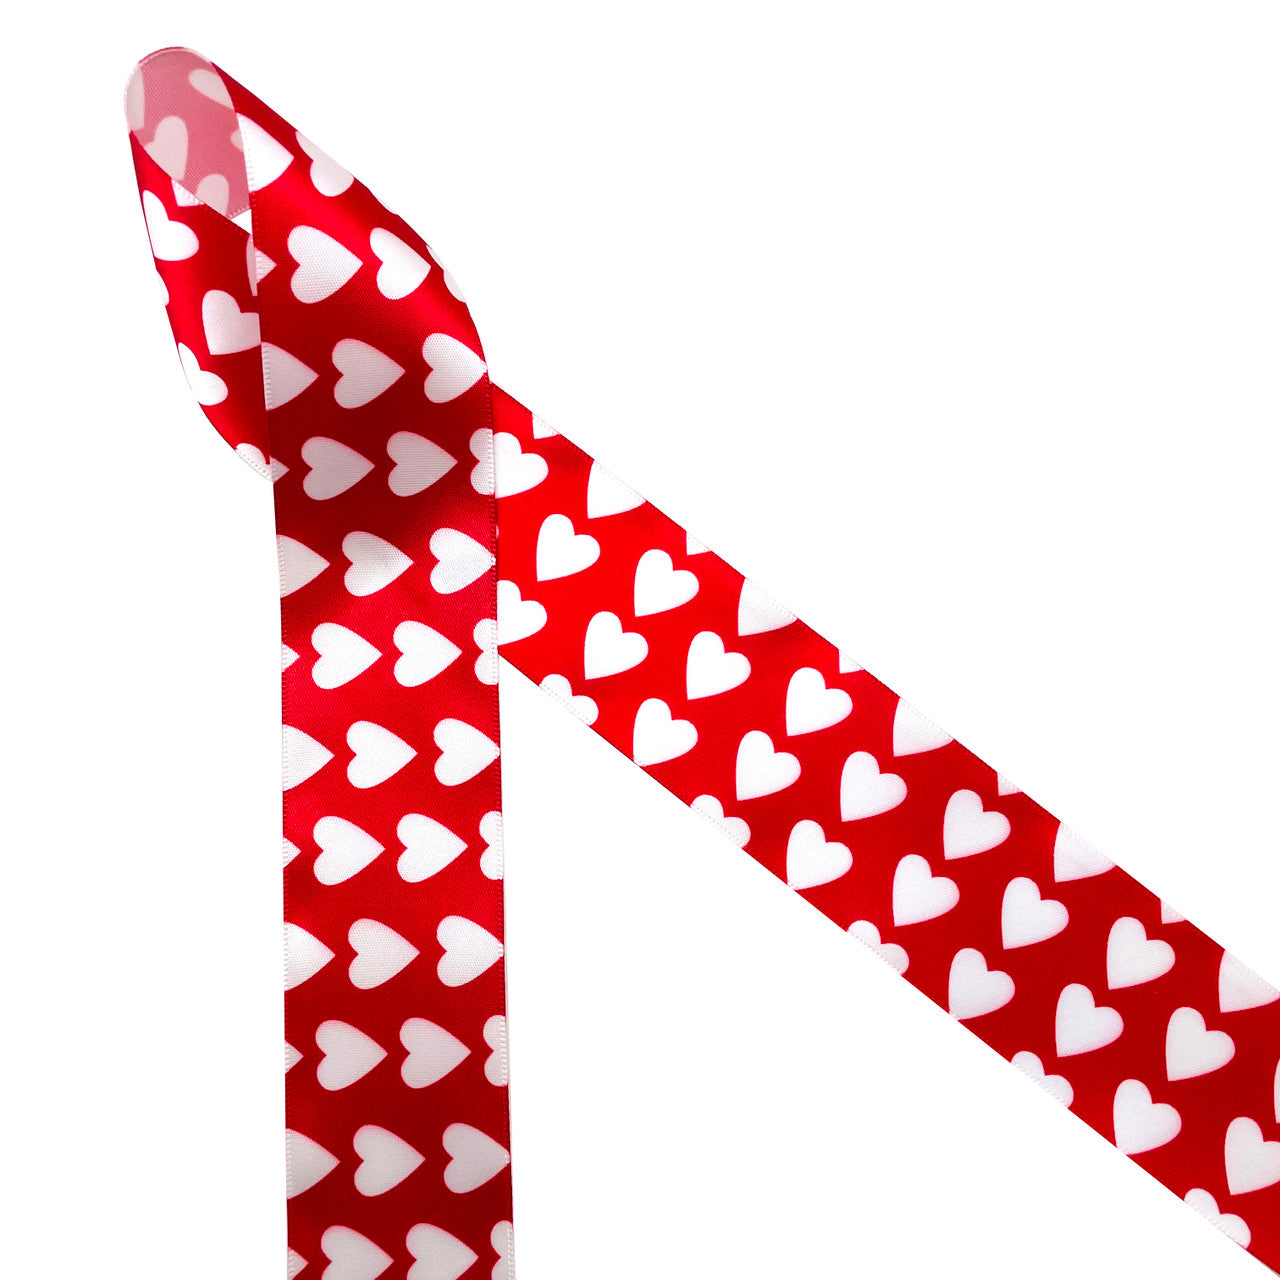 White hearts on a red background printed on 1.5" white single face satin ribbon is a Valentine classic!  The width of this ribbon lends itself to gift wrapping, gift baskets, Valentine party decor, sweets tables, candy shops and chocolatiers! This is also a great ribbon for Valentine crafts including wreaths, sewing and quilting projects! All our ribbon is designed and printed in the USA